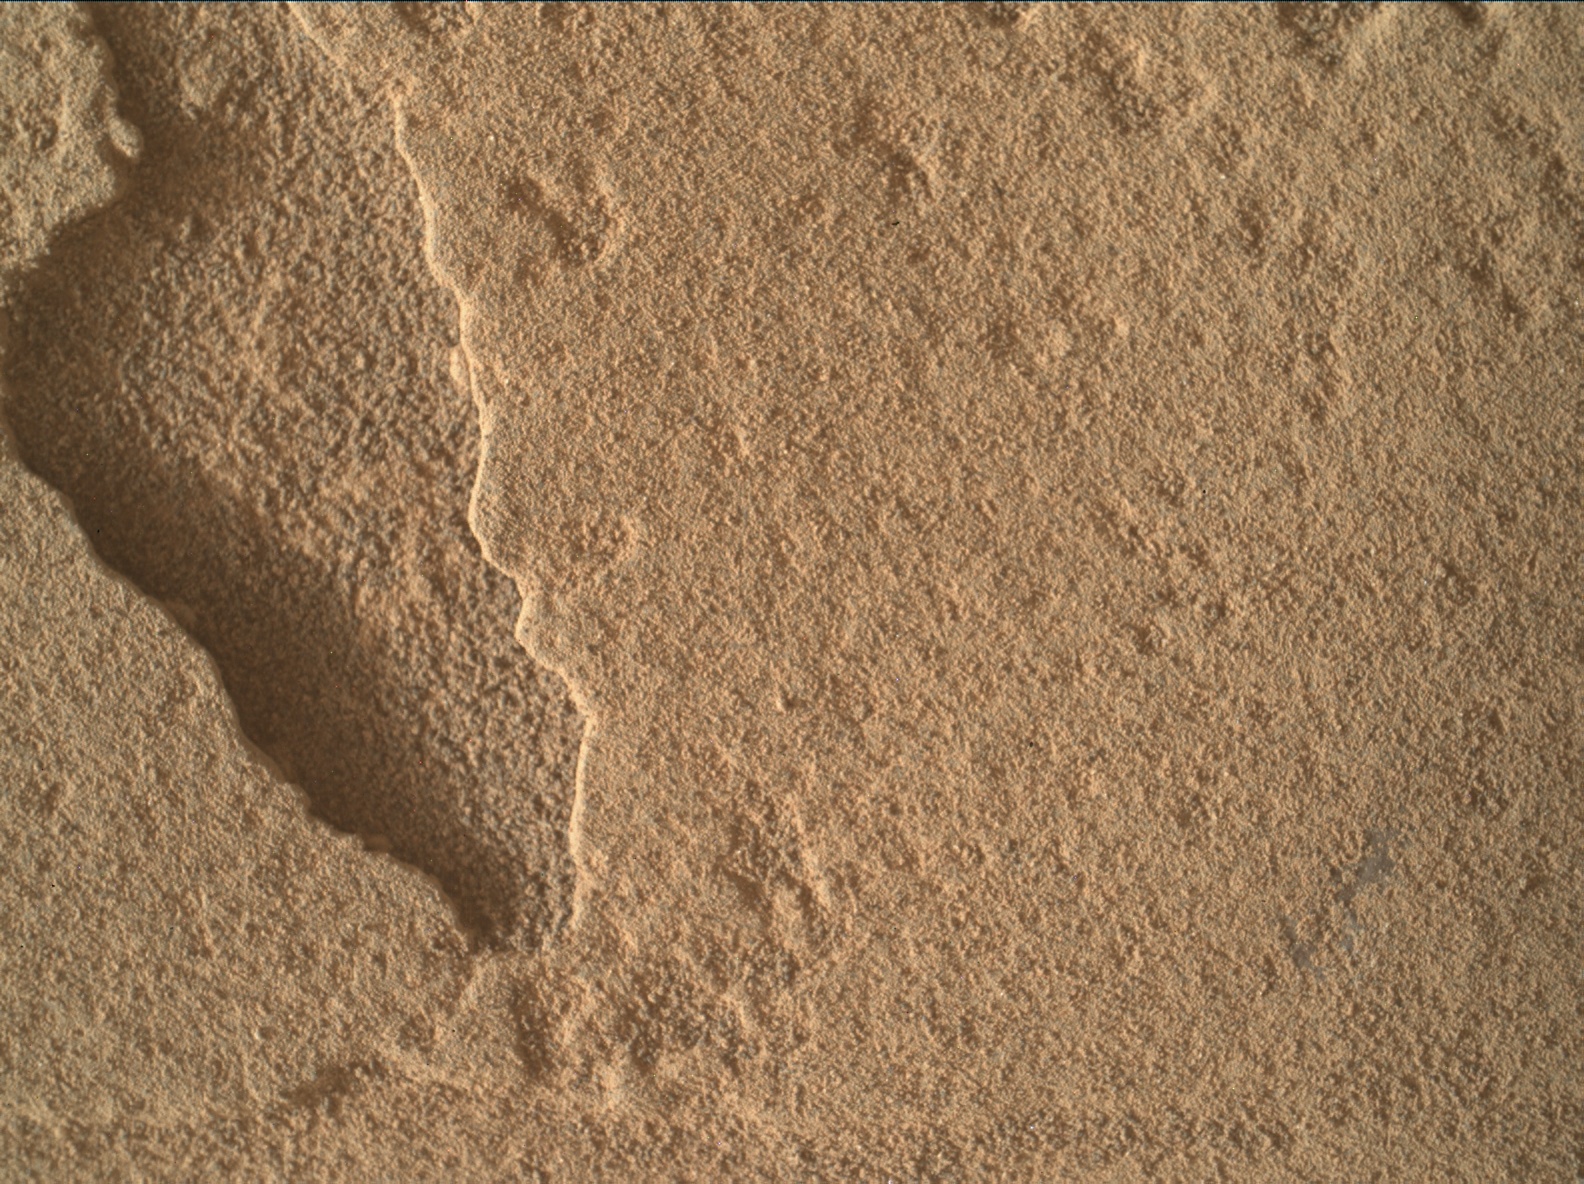 Nasa's Mars rover Curiosity acquired this image using its Mars Hand Lens Imager (MAHLI) on Sol 3900